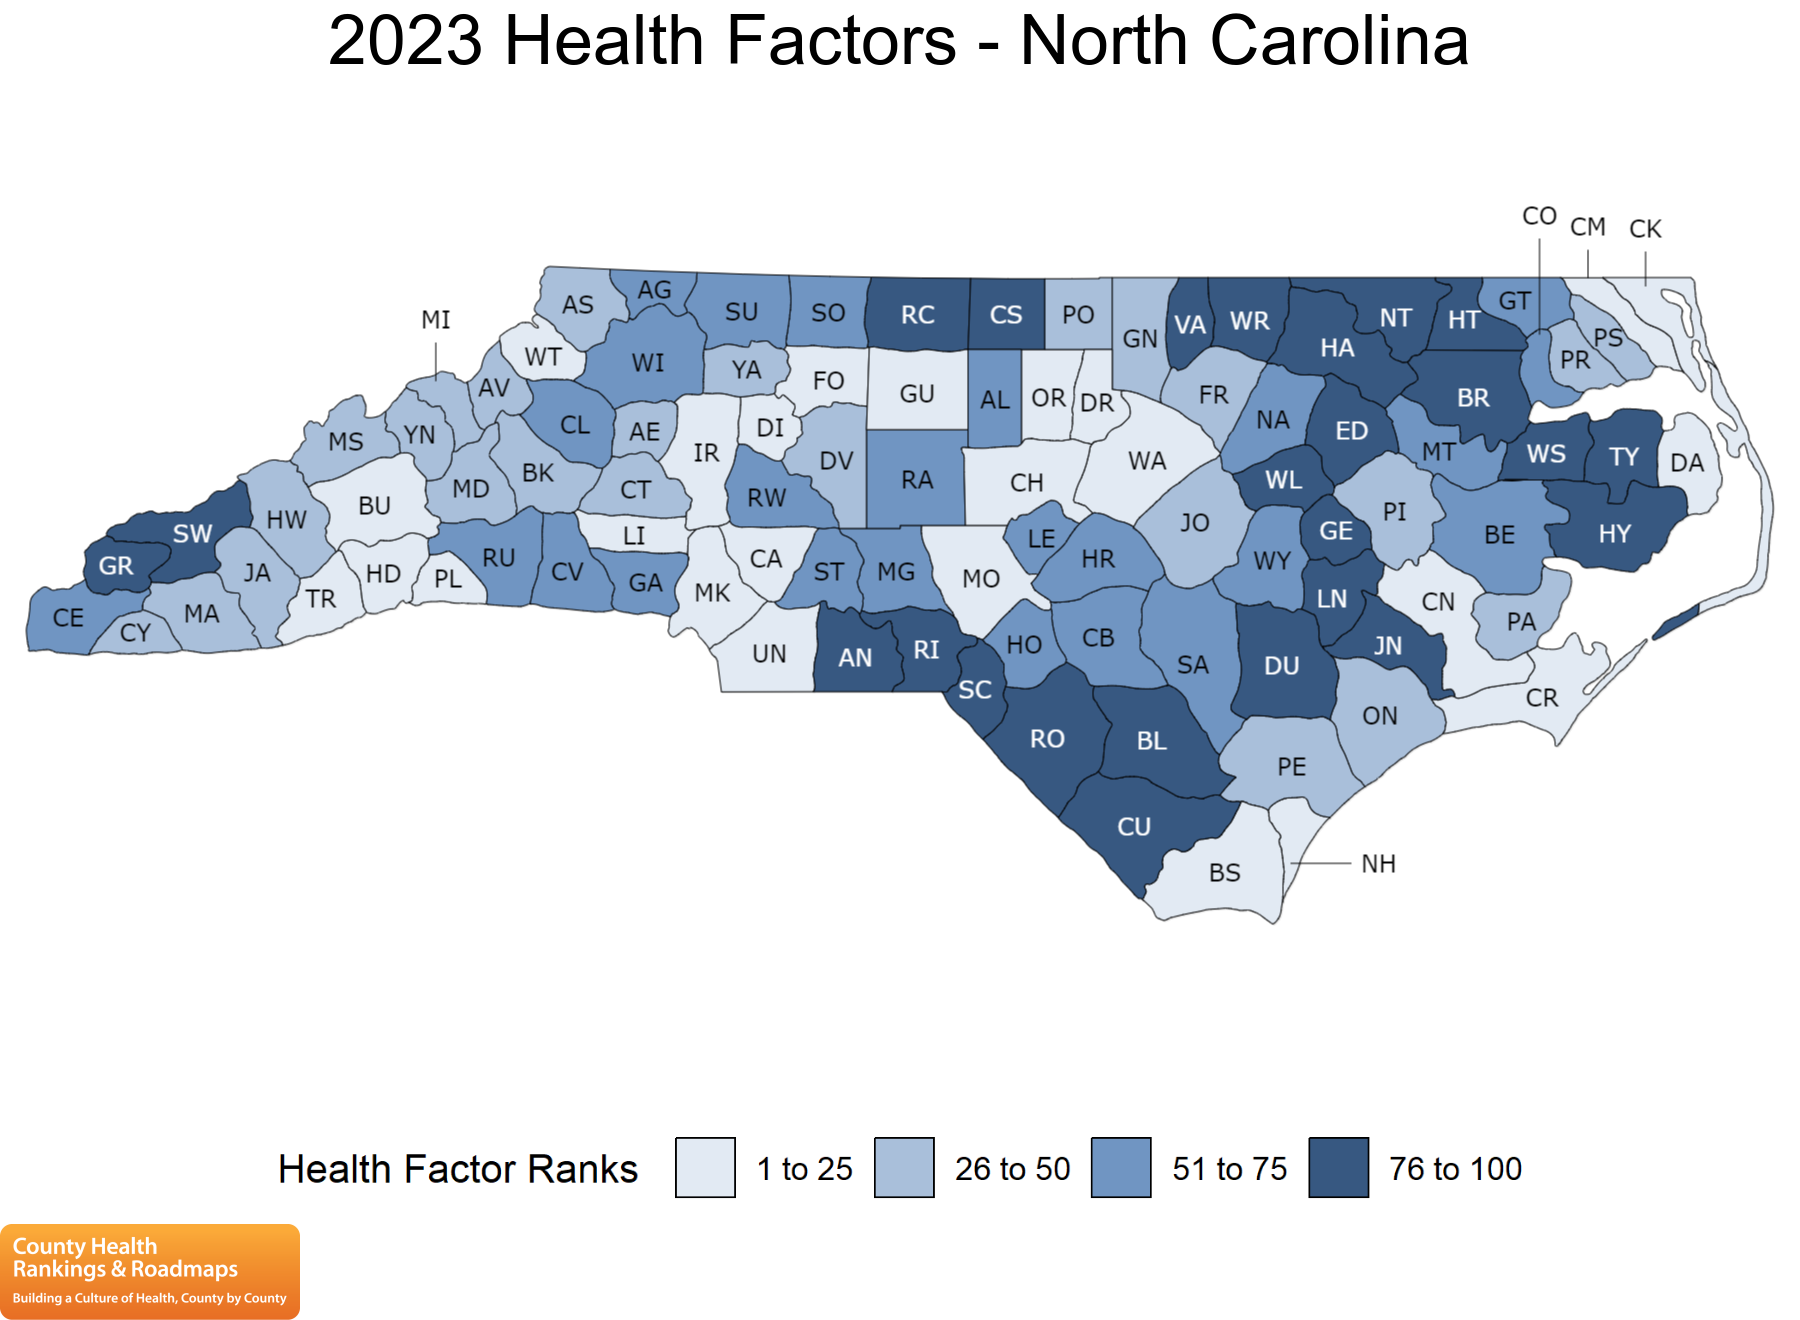 Data and Resources | County Health Rankings & Roadmaps